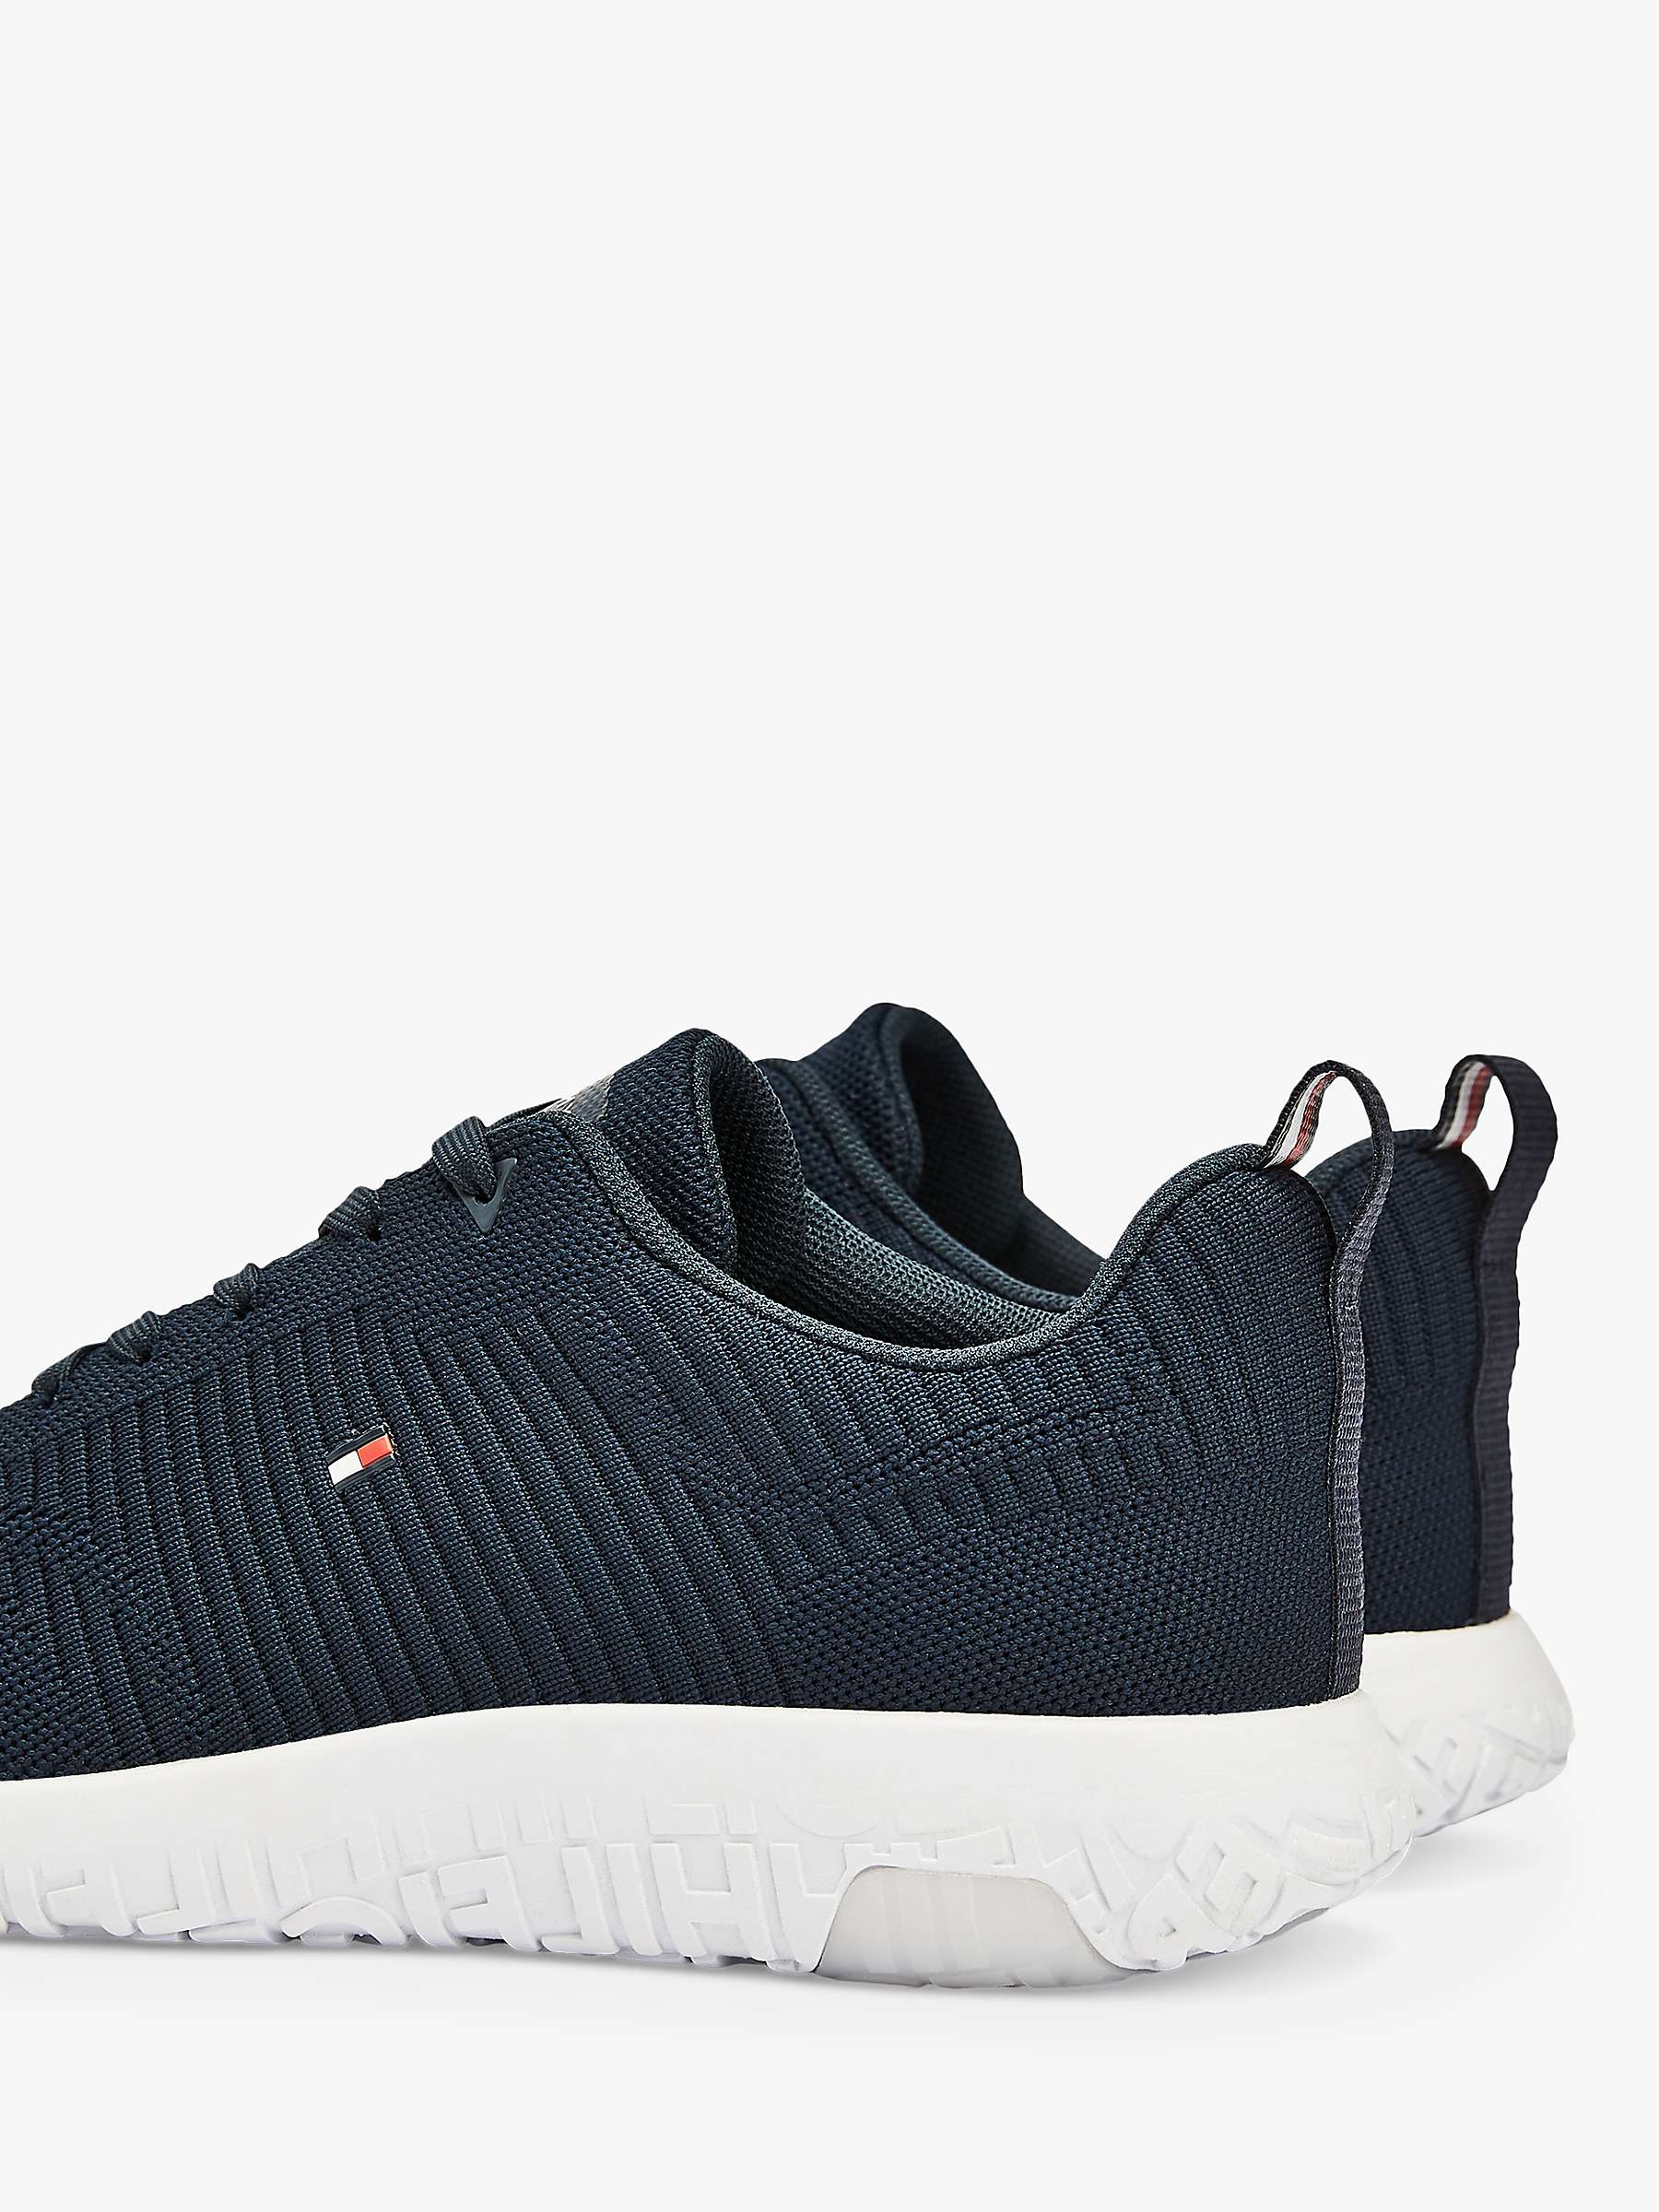 Buy Tommy Hilfiger Corporate Knit Runner Trainers, Desert Sky Online at johnlewis.com